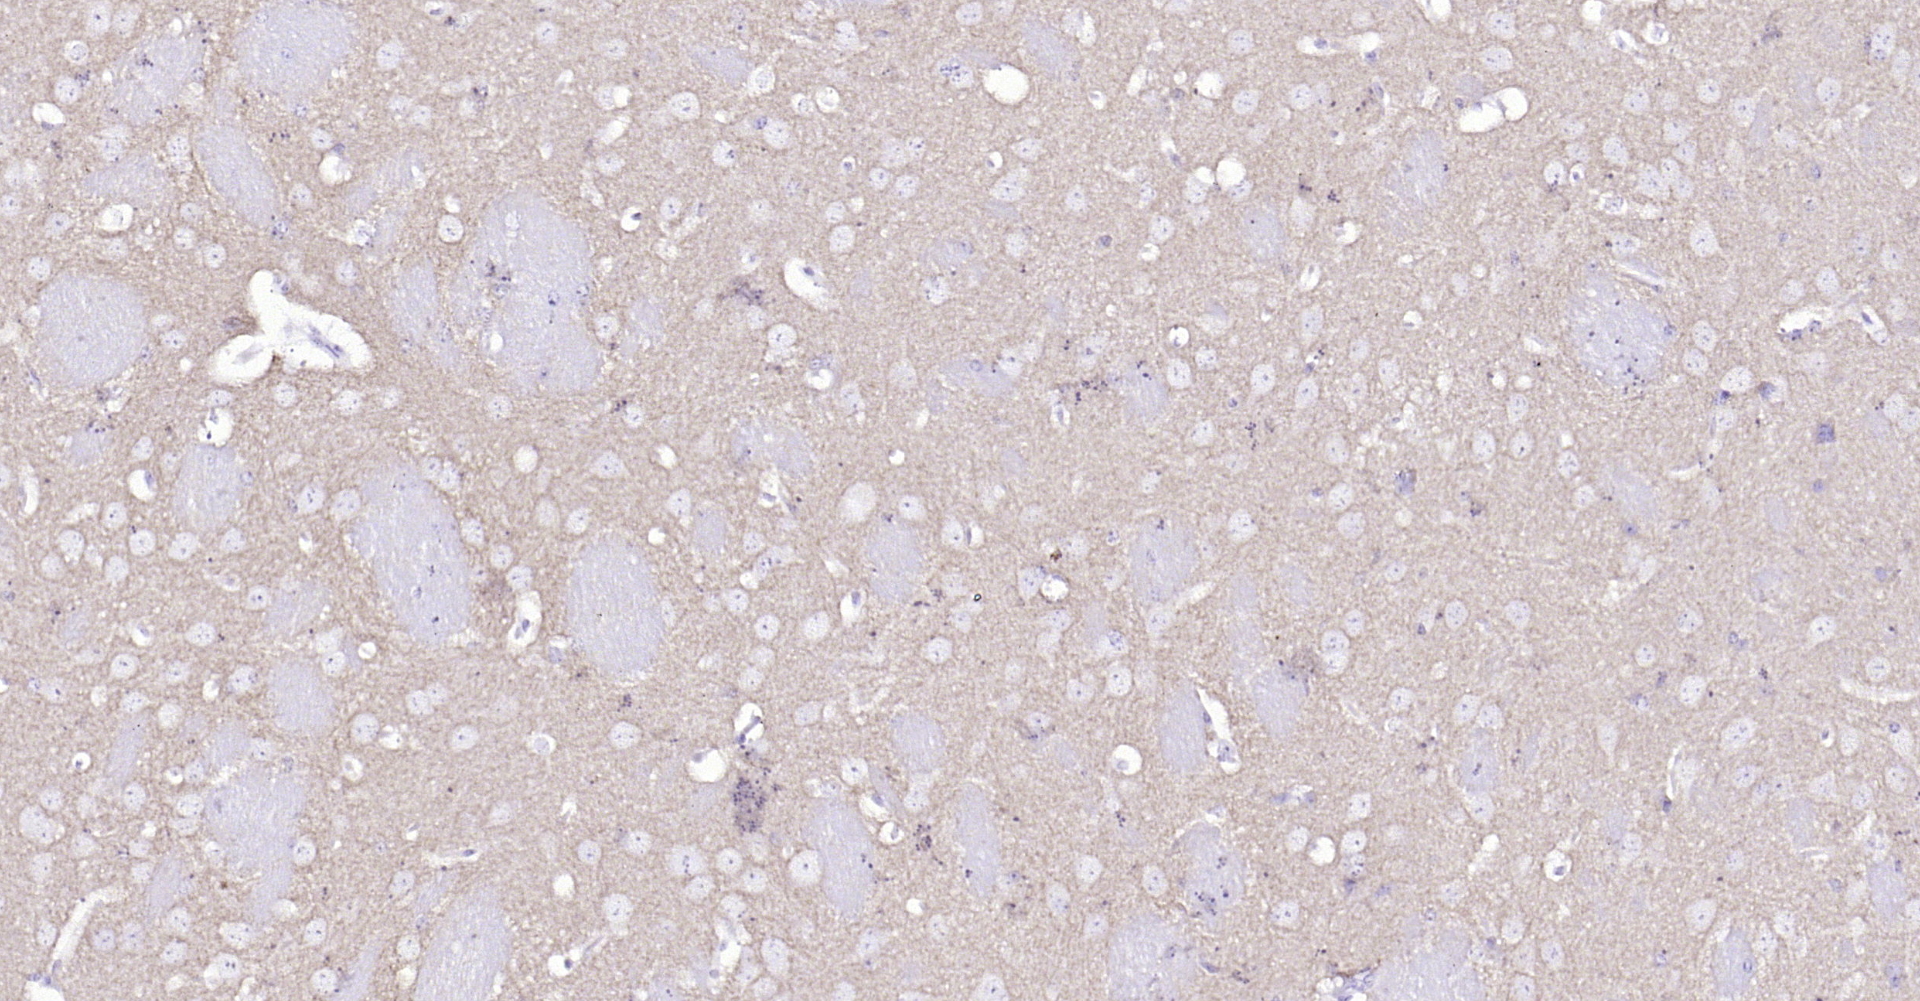 Paraformaldehyde-fixed, paraffin embedded Mouse brain; Antigen retrieval by boiling in sodium citrate buffer (pH6.0) for 15min; Block endogenous peroxidase by 3% hydrogen peroxide for 20 minutes; Blocking buffer (normal goat serum) at 37\u00b0C for 30min; Antibody incubation with Alpha-Synuclein Polyclonal Antibody, Unconjugated (bs-0968R) at 1:200 overnight at 4\u00b0C, DAB staining.